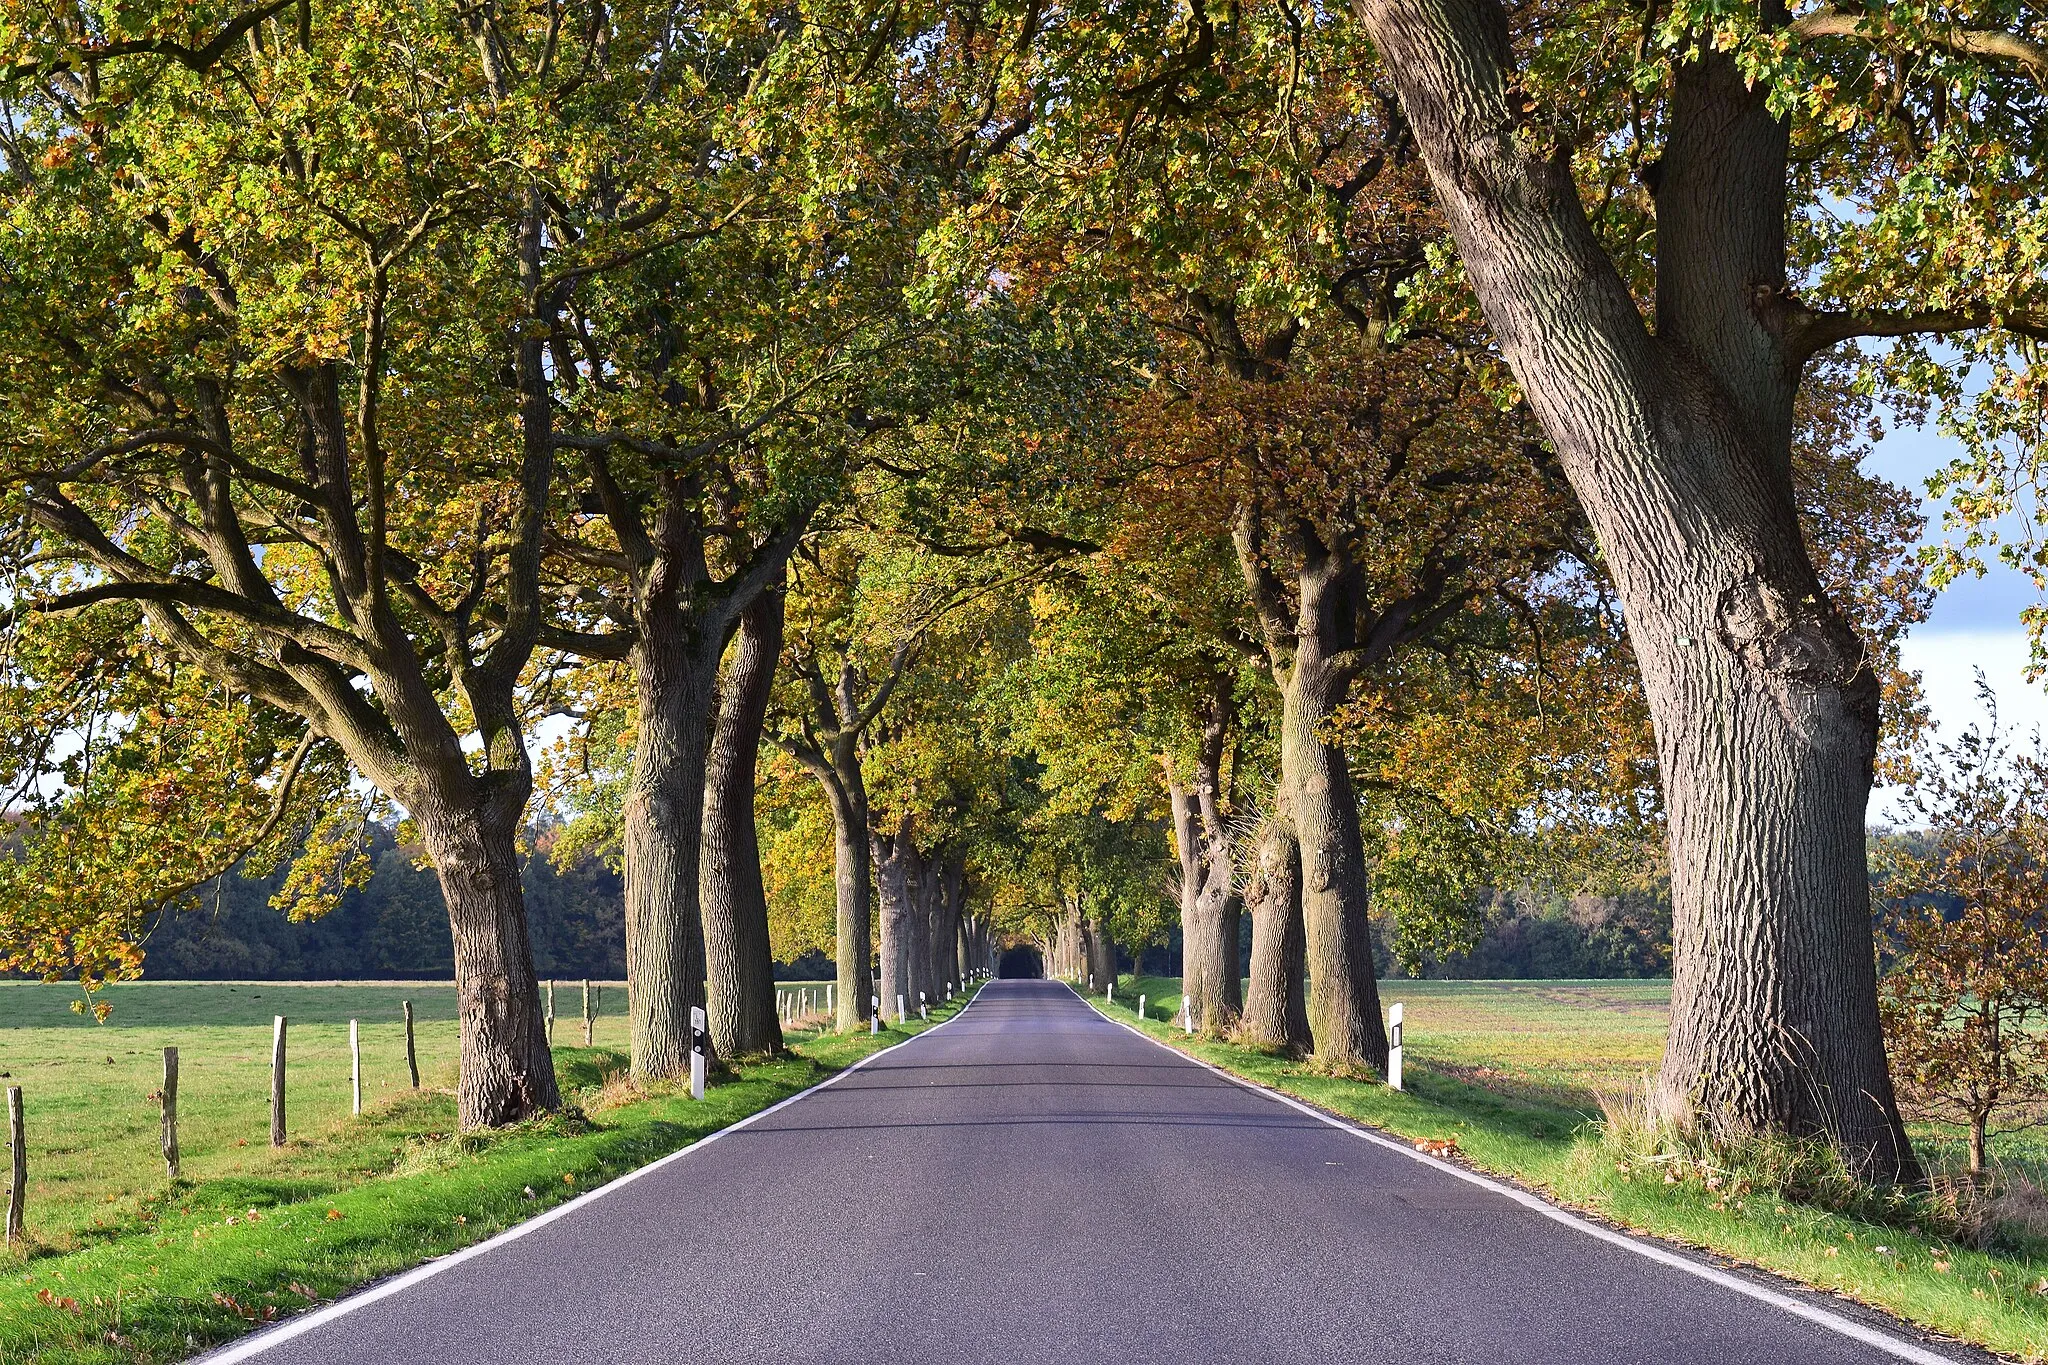 Photo showing: L 191 state road lined with oak trees, about 200 meters after leaving Dänschenburg in the direction of Sanitz, Germany